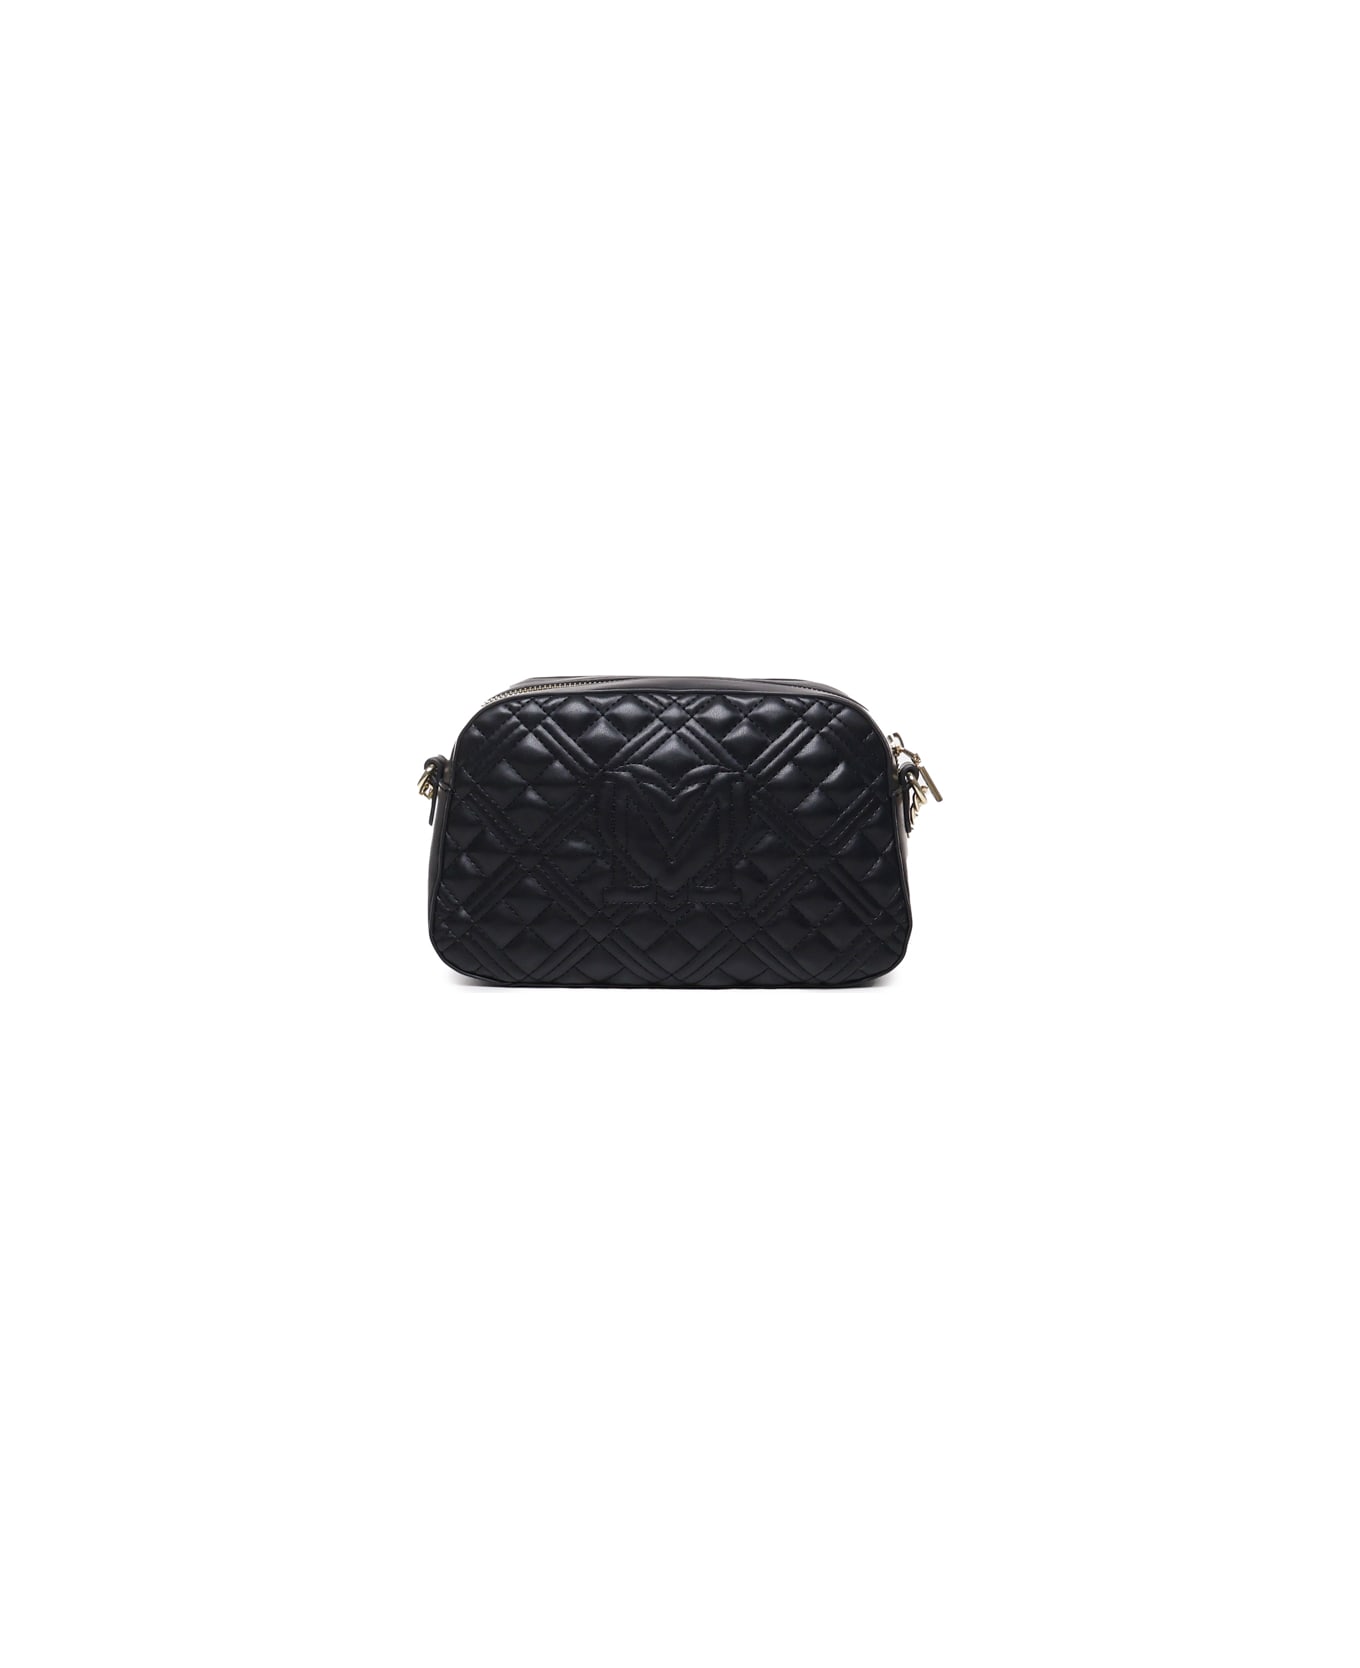 Love Moschino Quilted Bag With Logo - Black バッグ